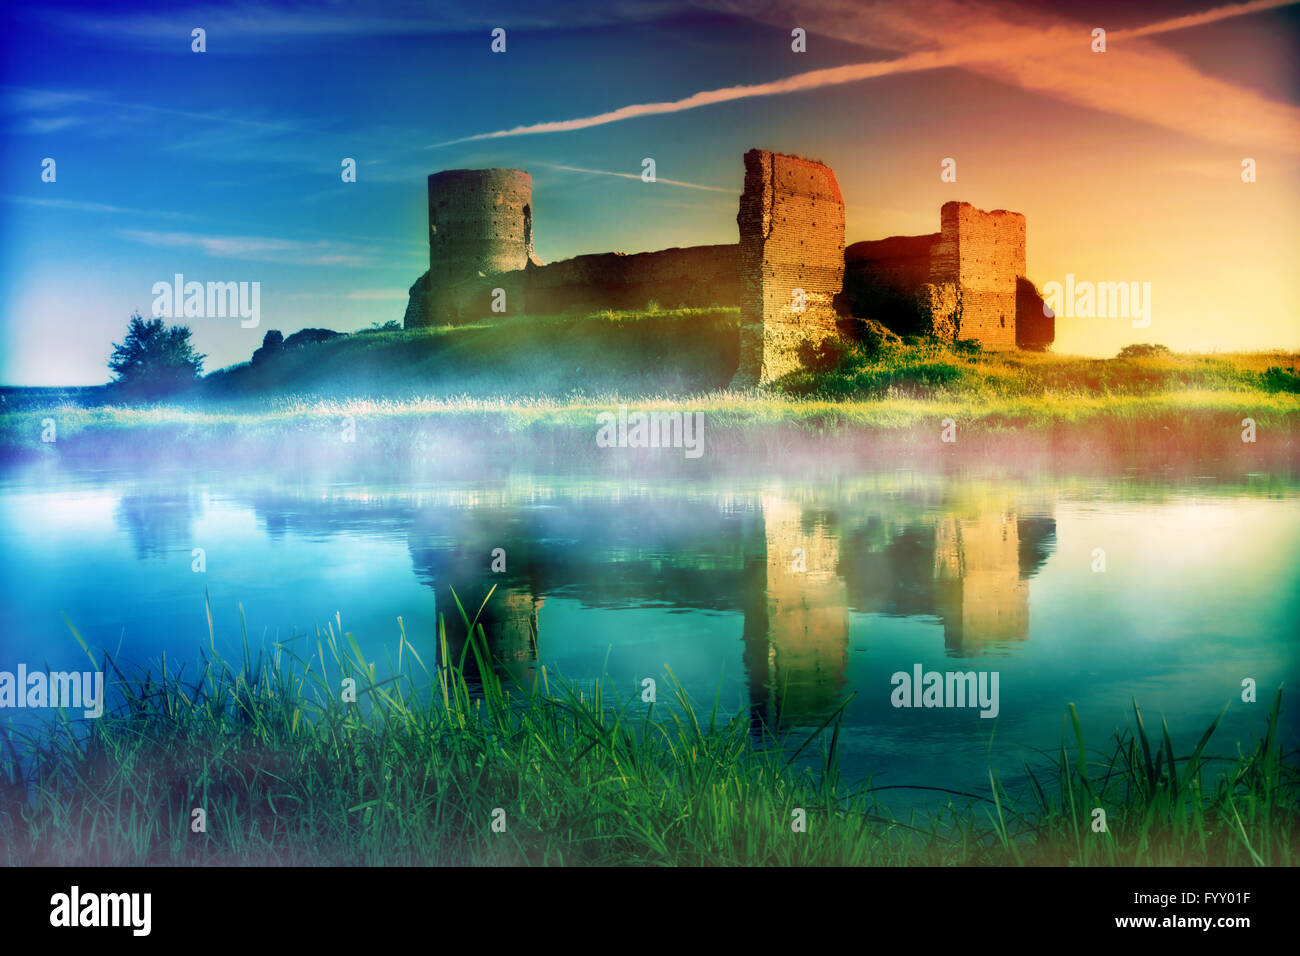 Old castle ruins at magical sunset Stock Photo